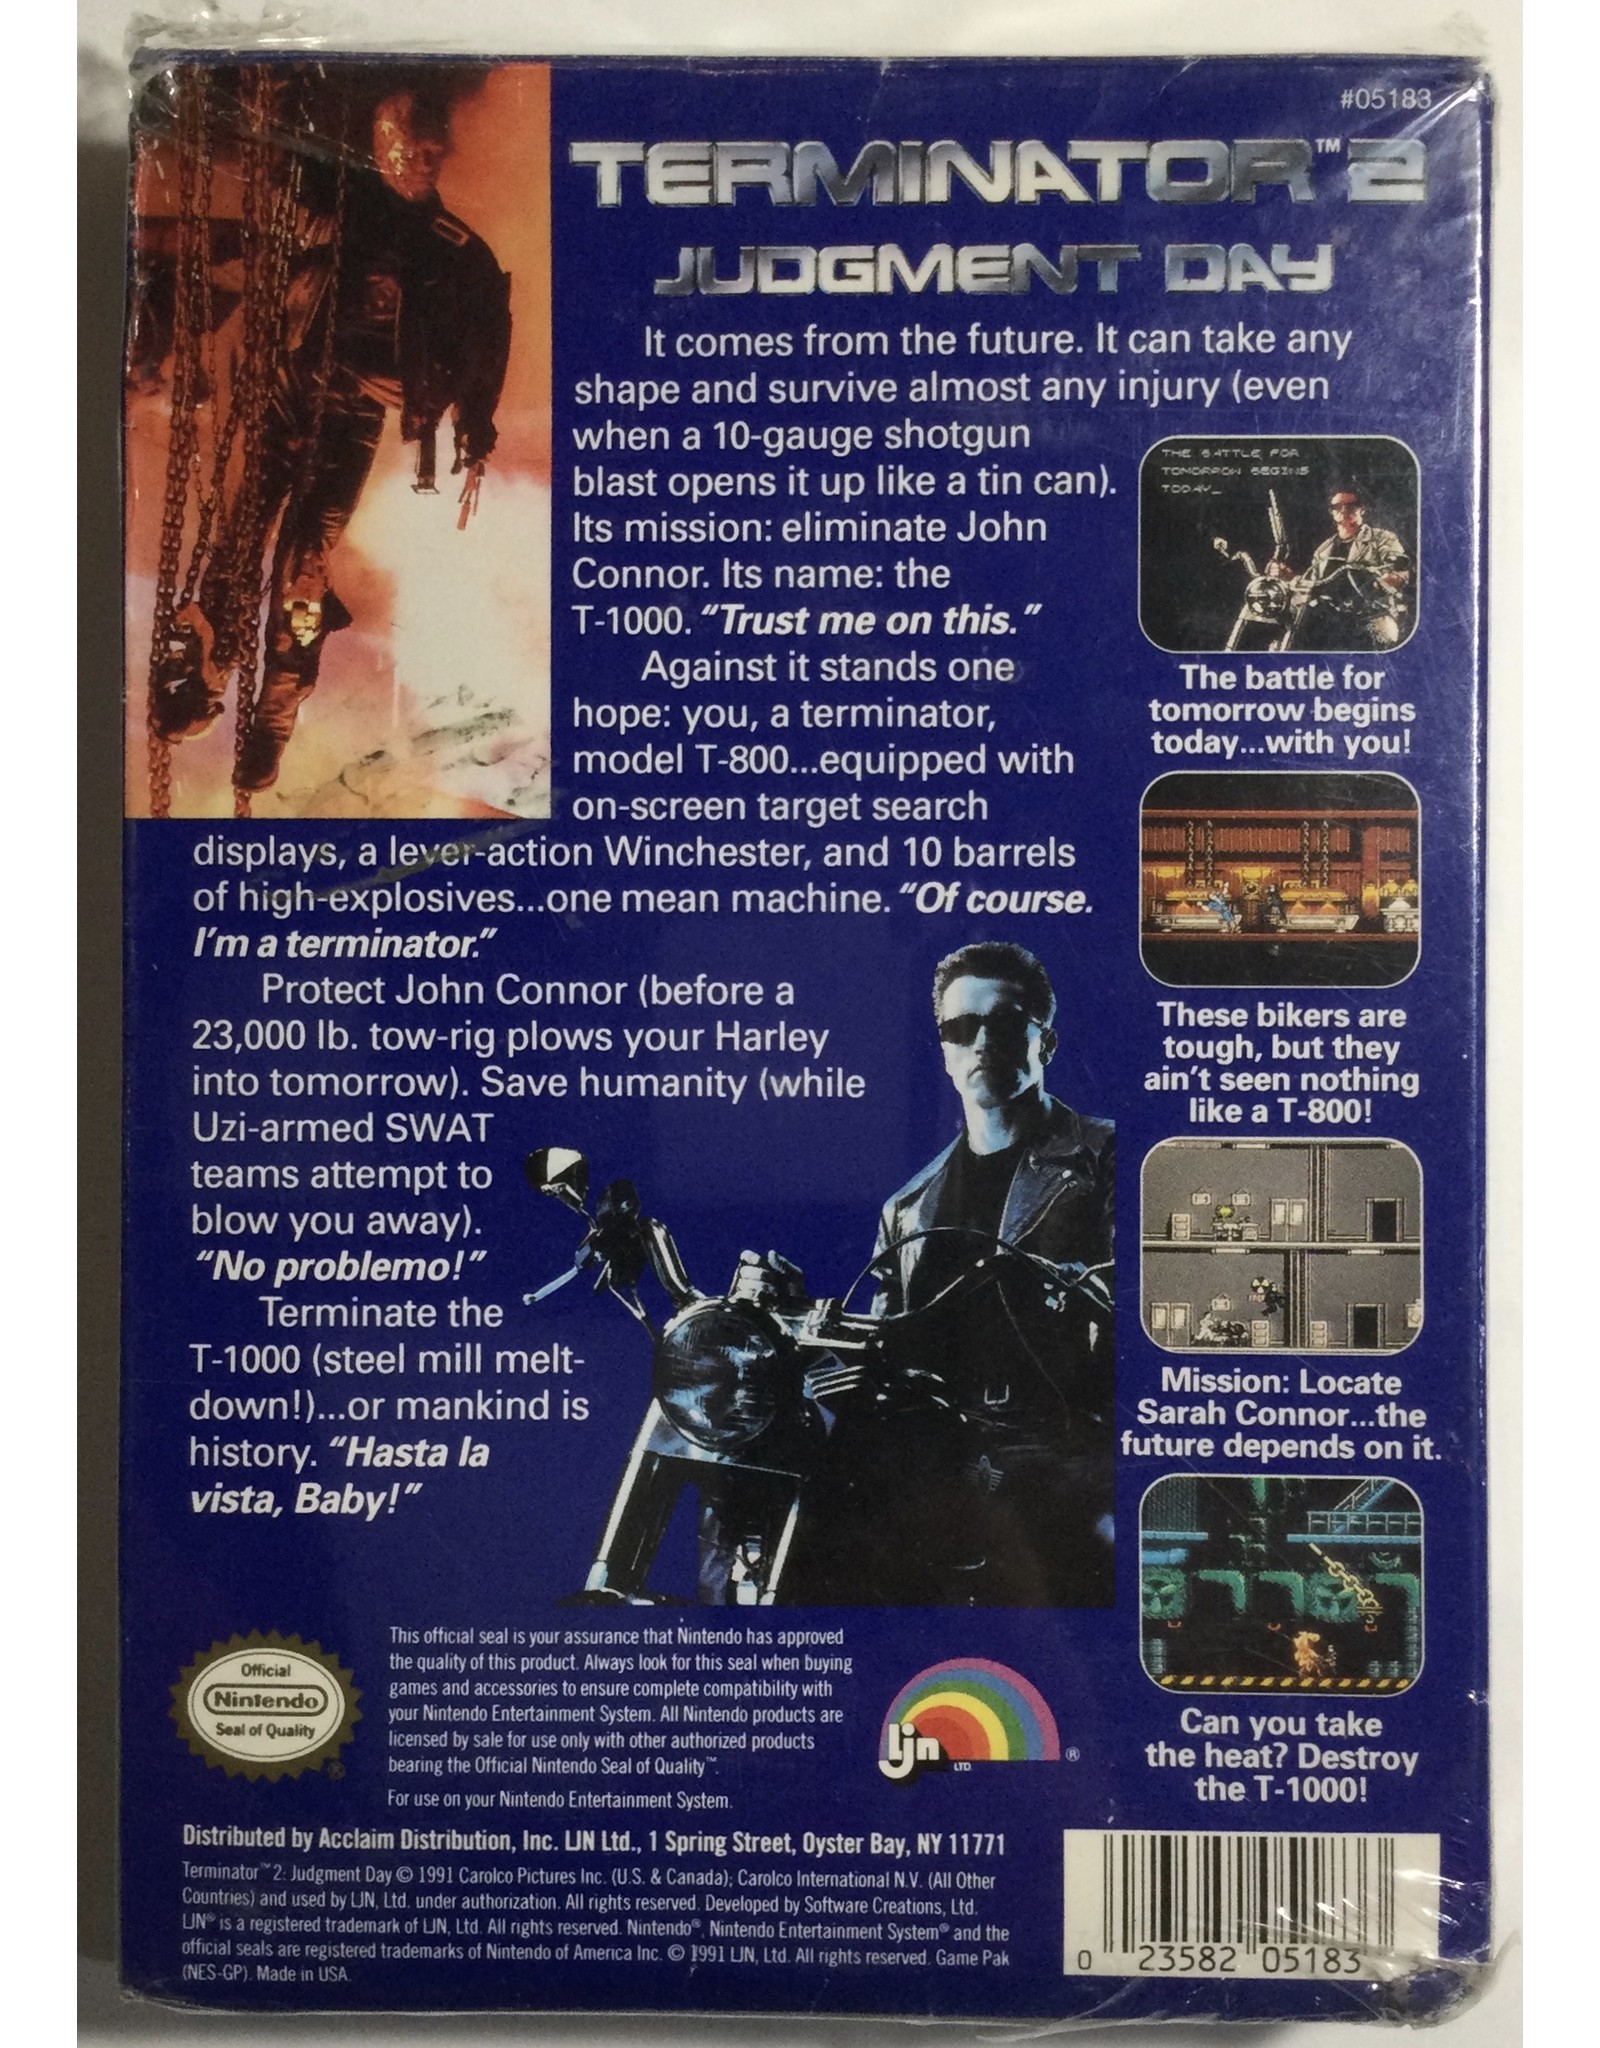 T2 Terminator's Judgement Day for Nintendo Entertainment System